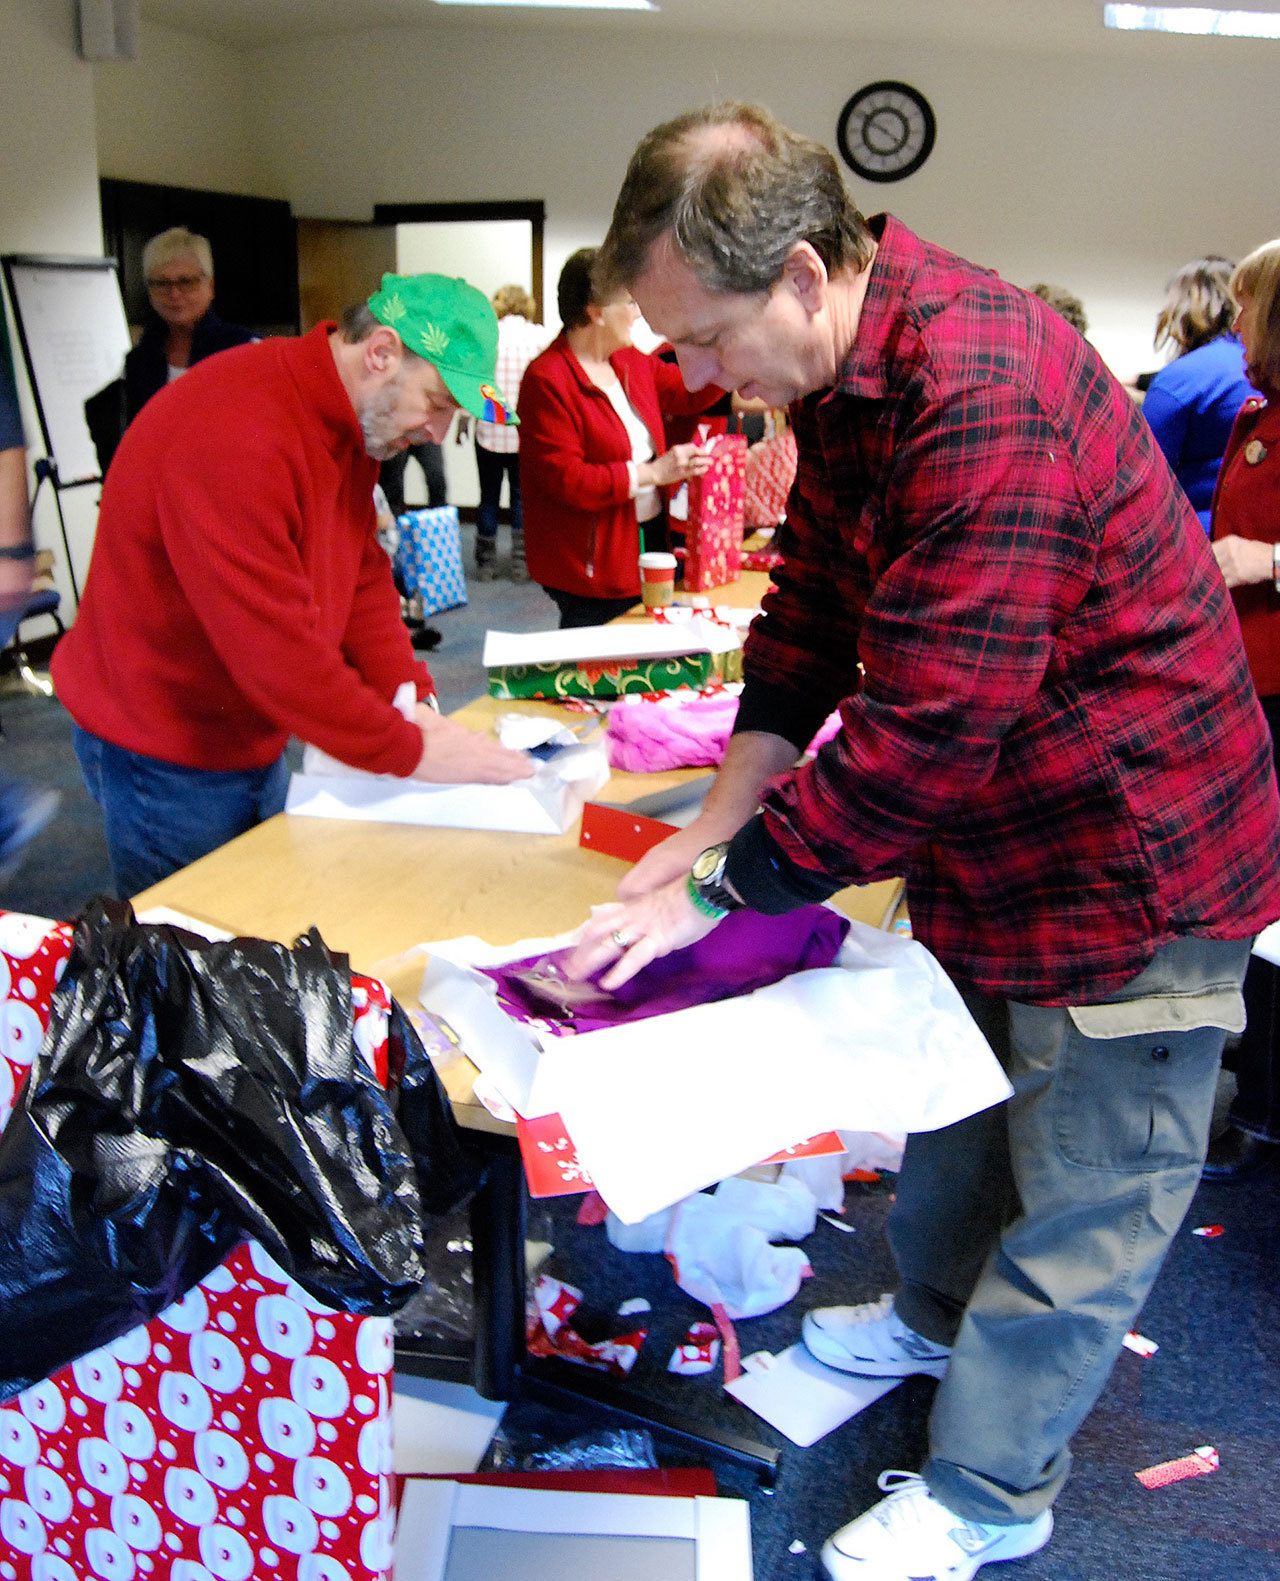 Volunteers Wayne Cohen (left) and Sean Smith wrap presents for a lucky child as part of the “Port Orchard Cares” event Saturday, Dec. 17. Bob Smith | Kitsap Daily News photo